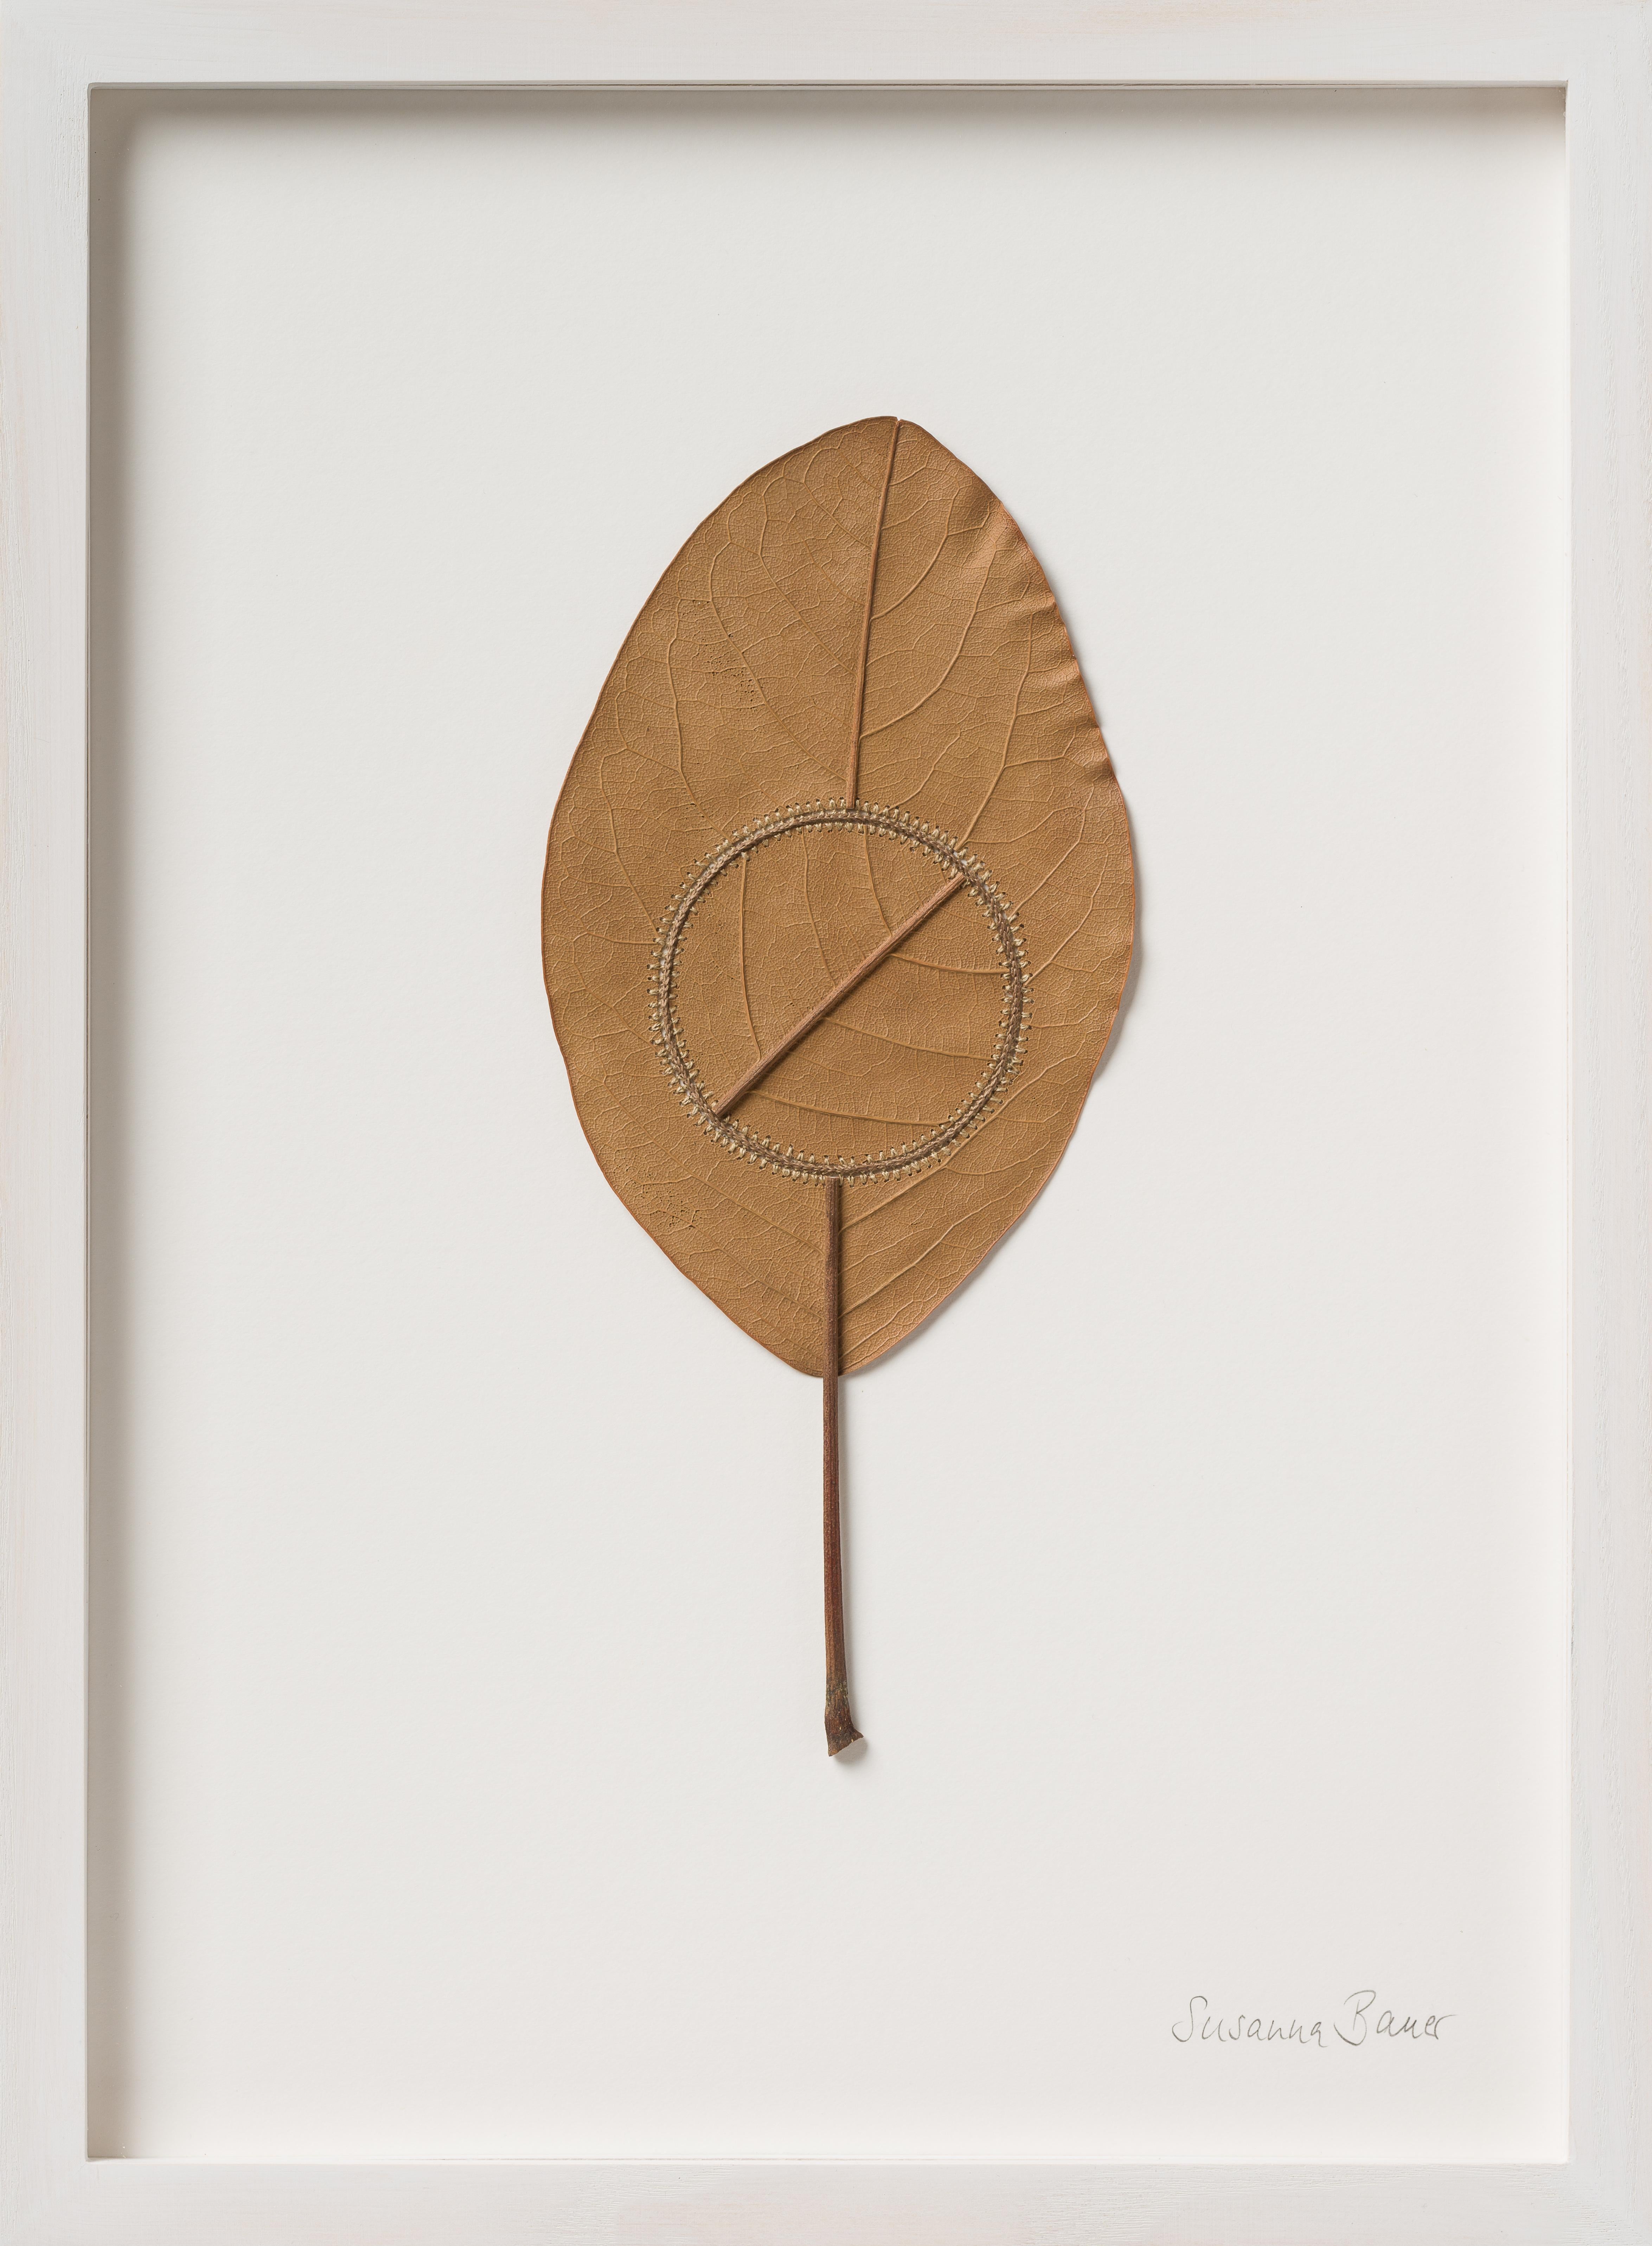 Navigation X - intricate contemporary embroidered leaf nature art - Mixed Media Art by Susanna Bauer